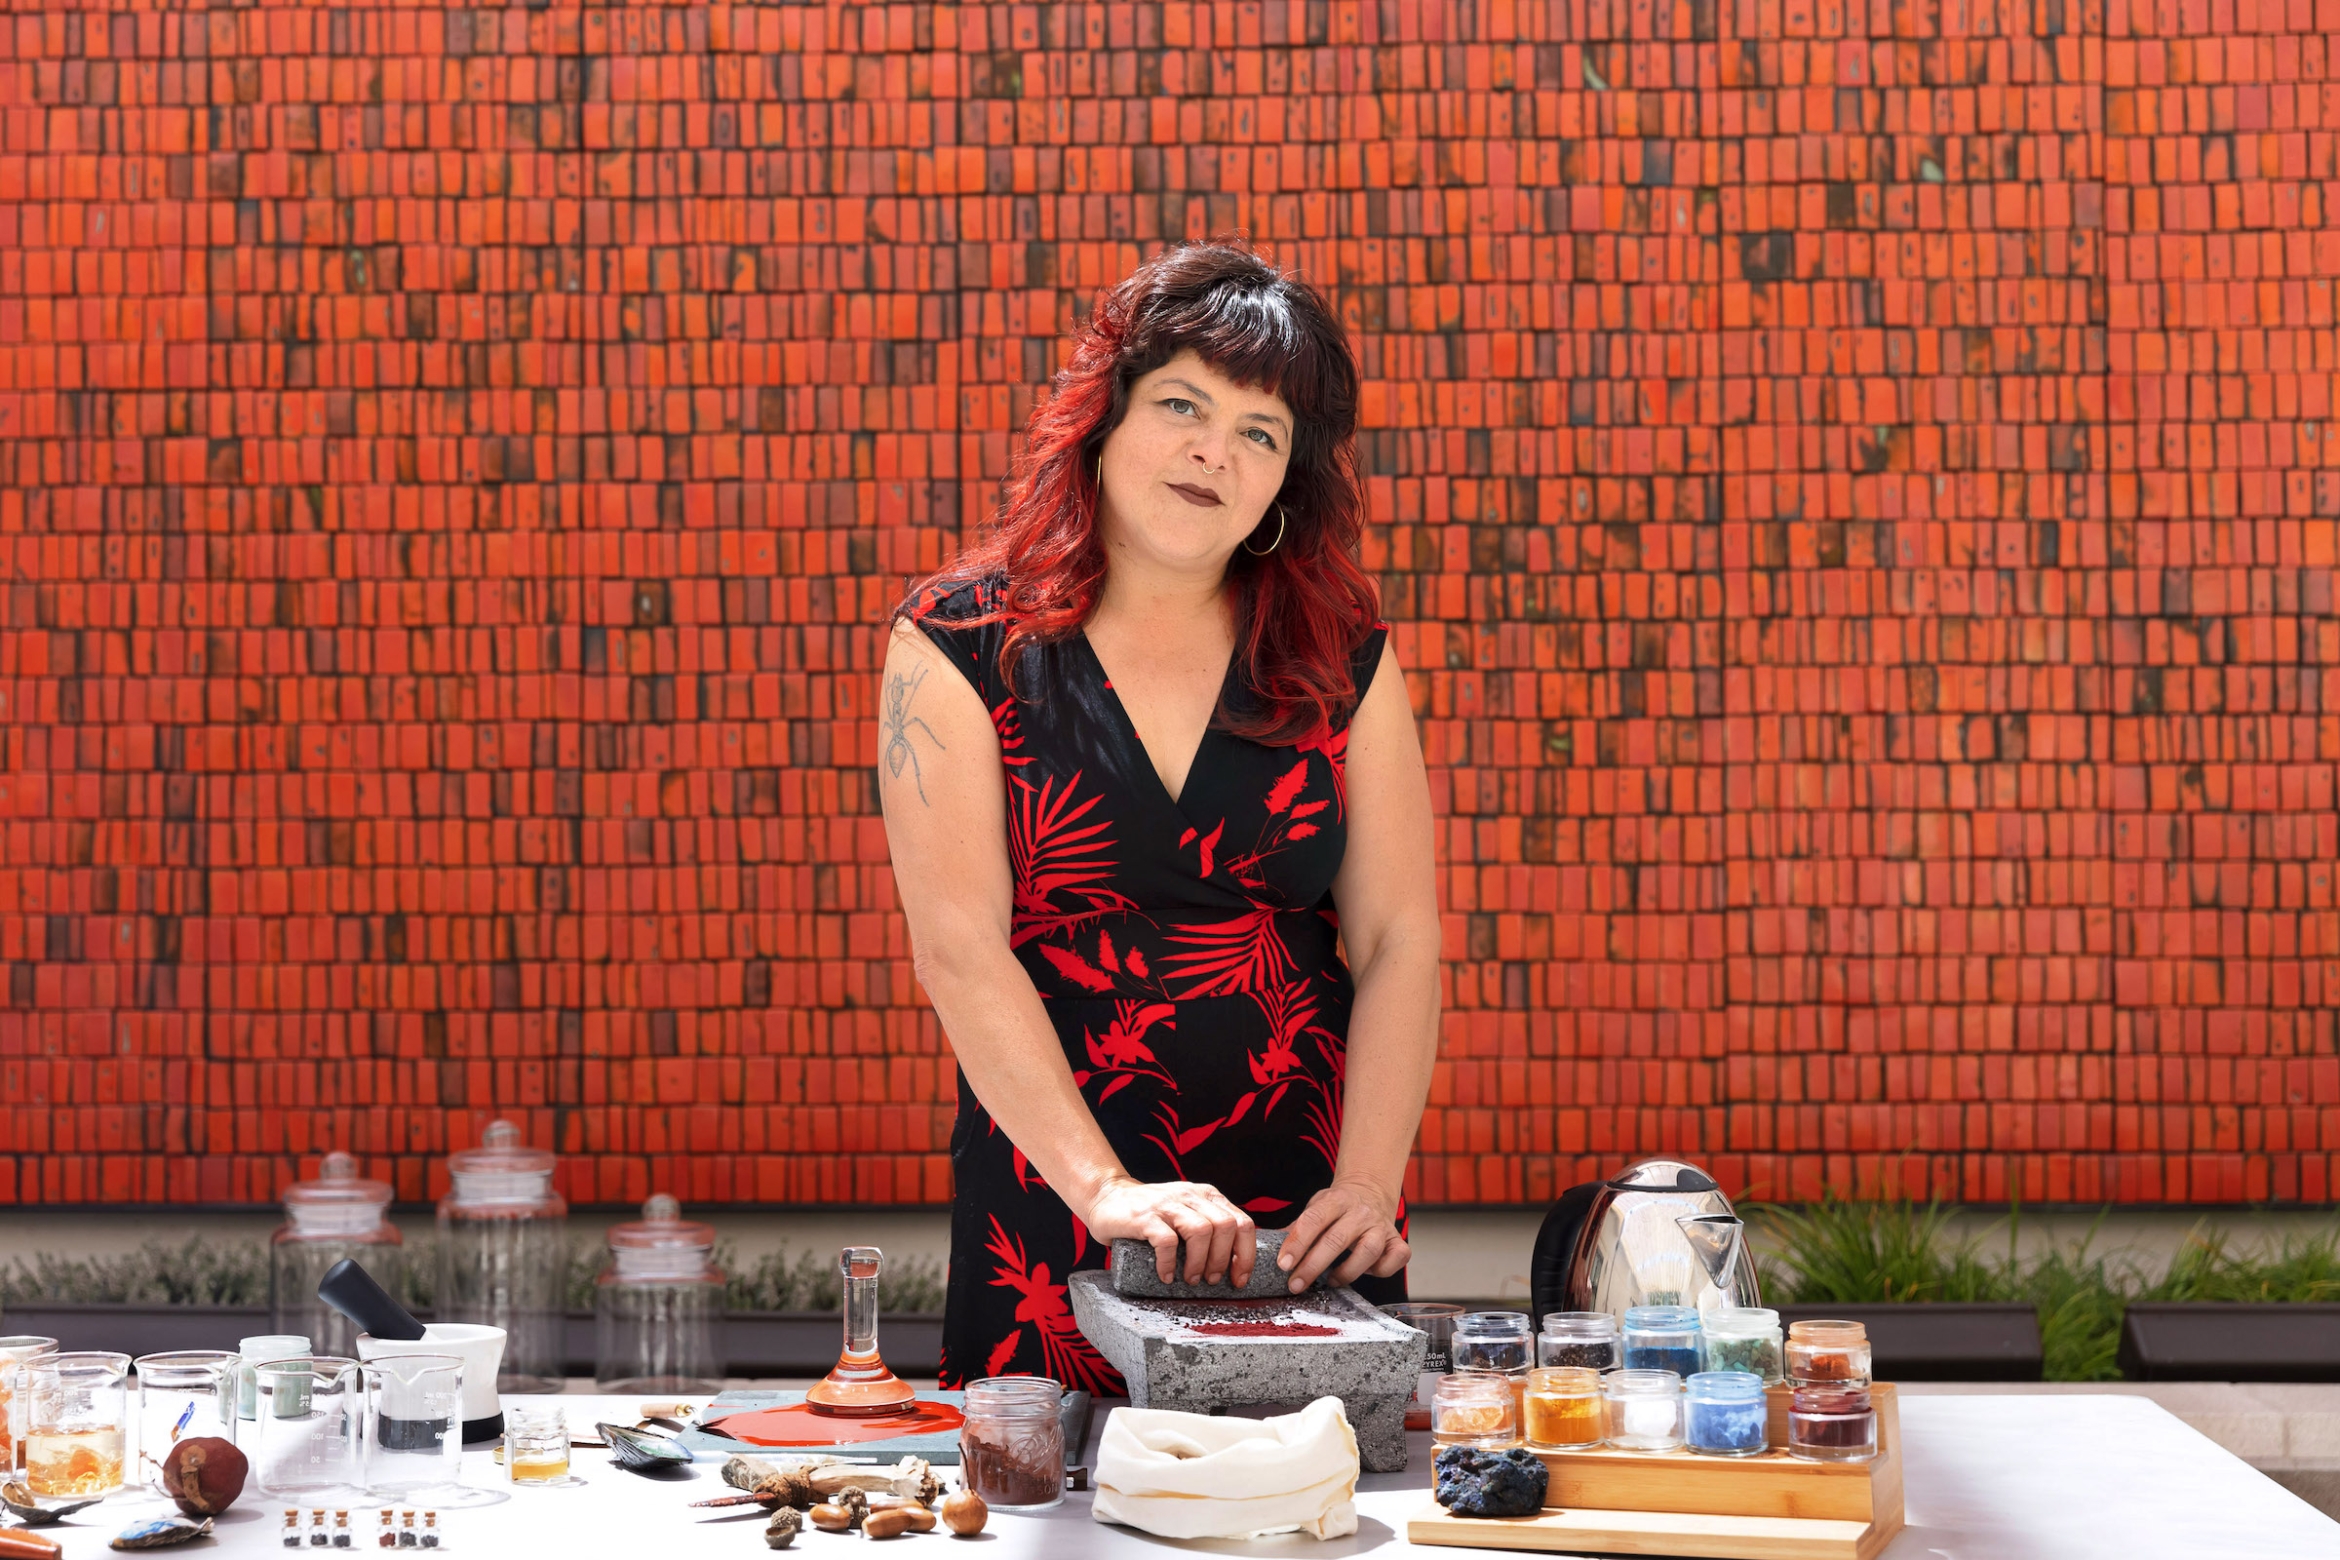 Woman with black hair with red streaks and bangs wearing a red and black dress grinds pigments on stone in front of a red tiled wall